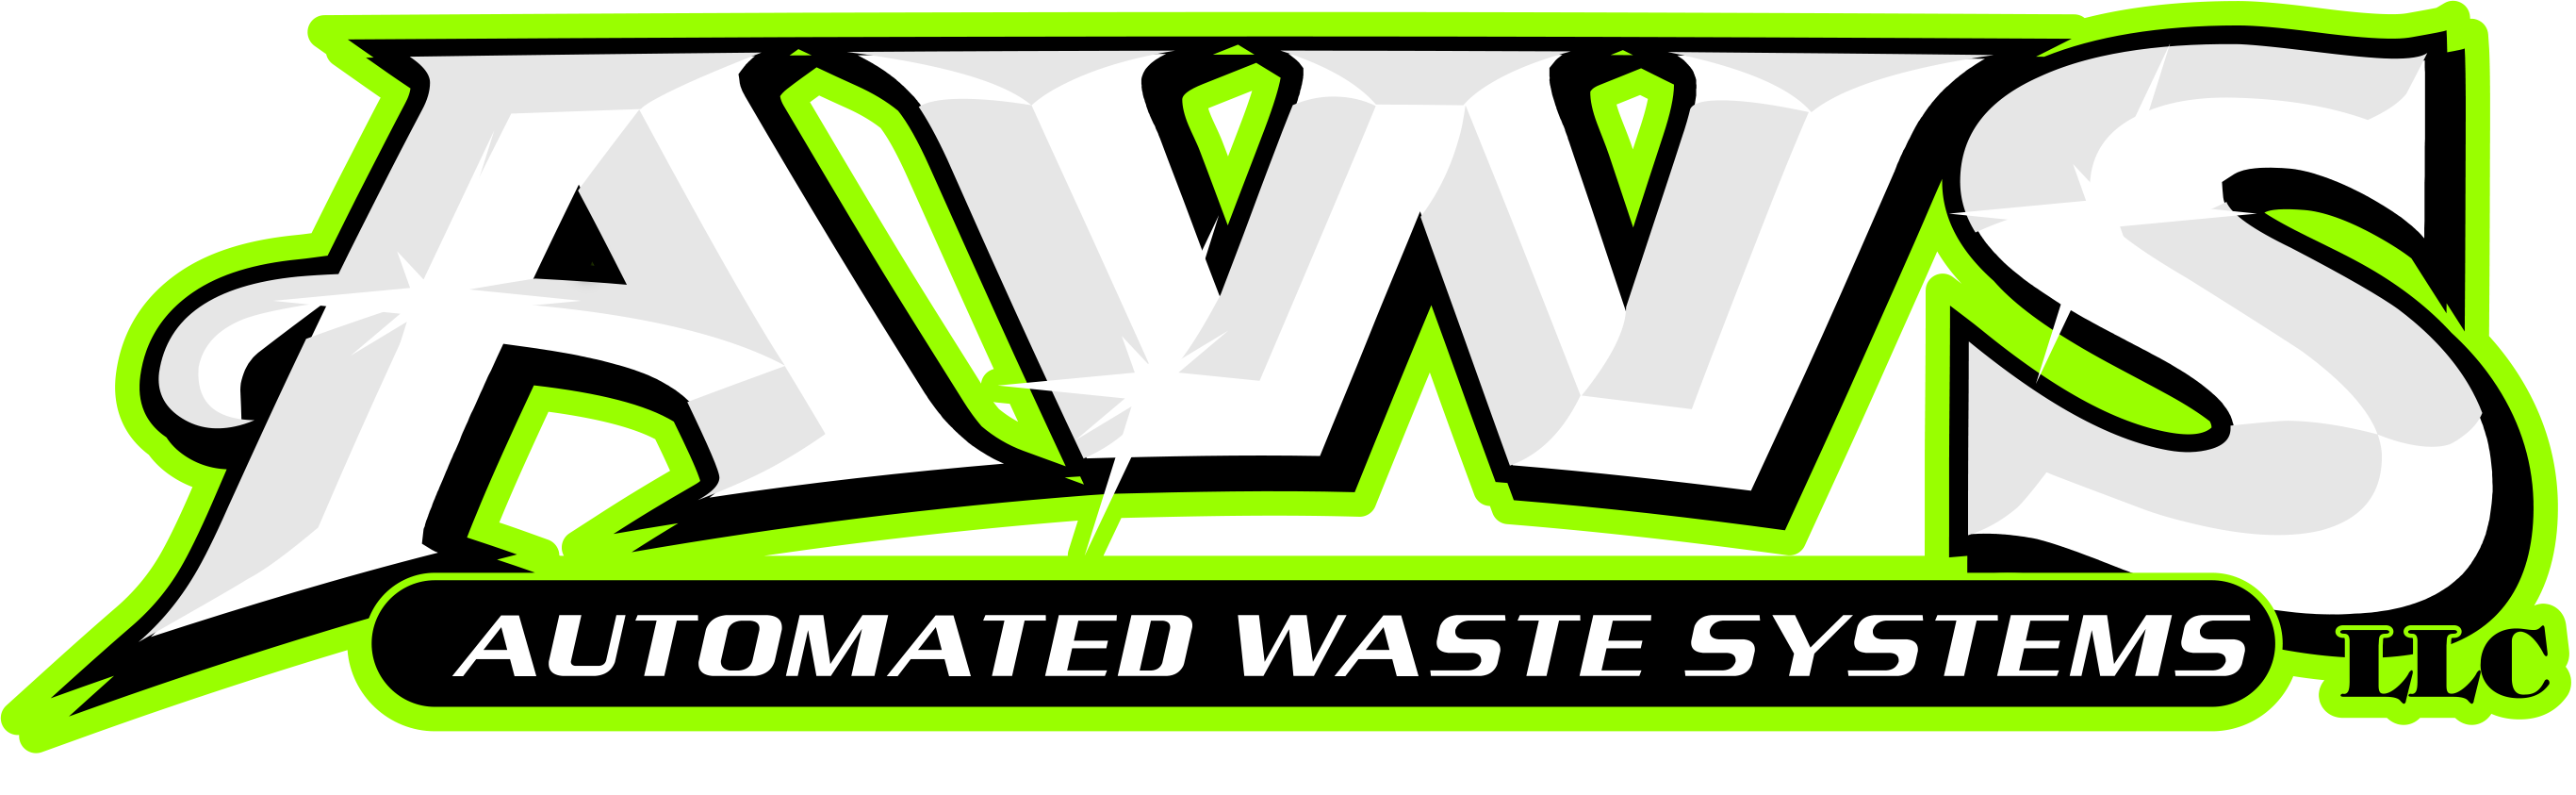 Automated Waste Systems, LLC SD